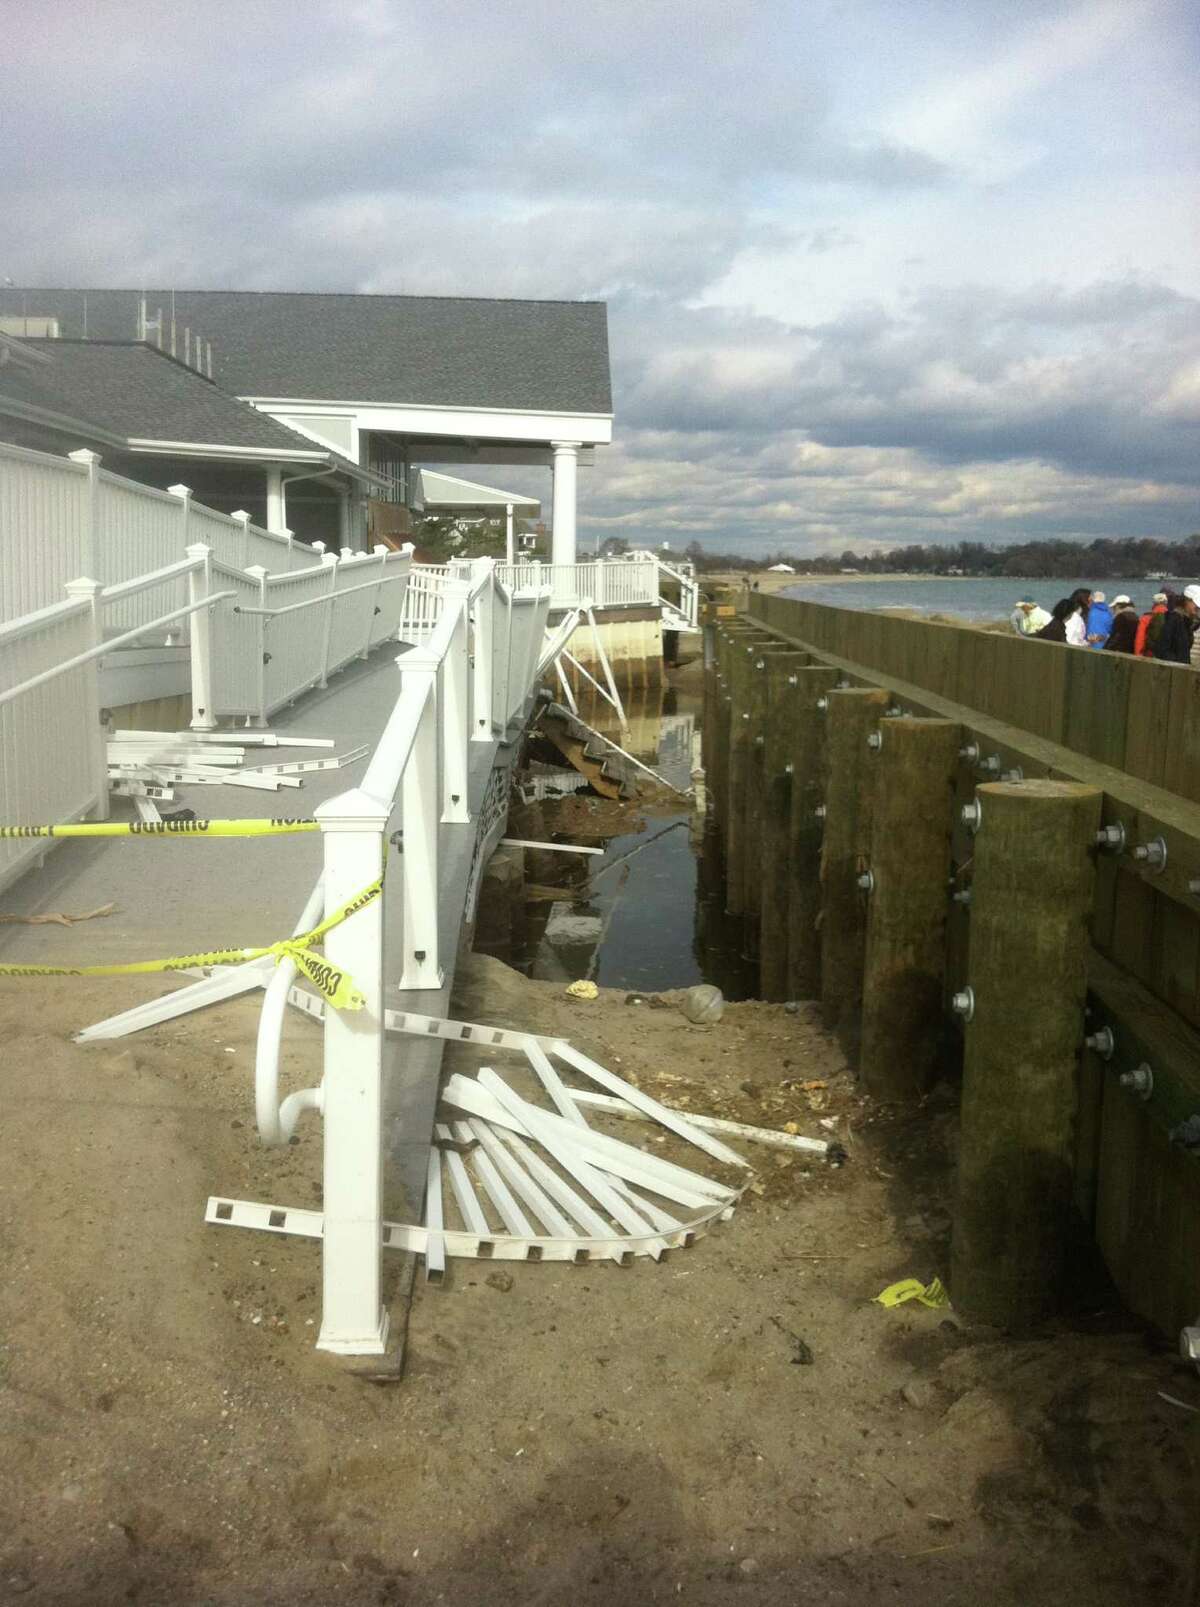 Penfield Pavilion, a $5.5 million project completed this September, has been compromised by Hurricane Sandy. Damage beneath the structure evident in twisted pilings, a warped deck and askew roof -- was bad enough to warrant at the least significant work.